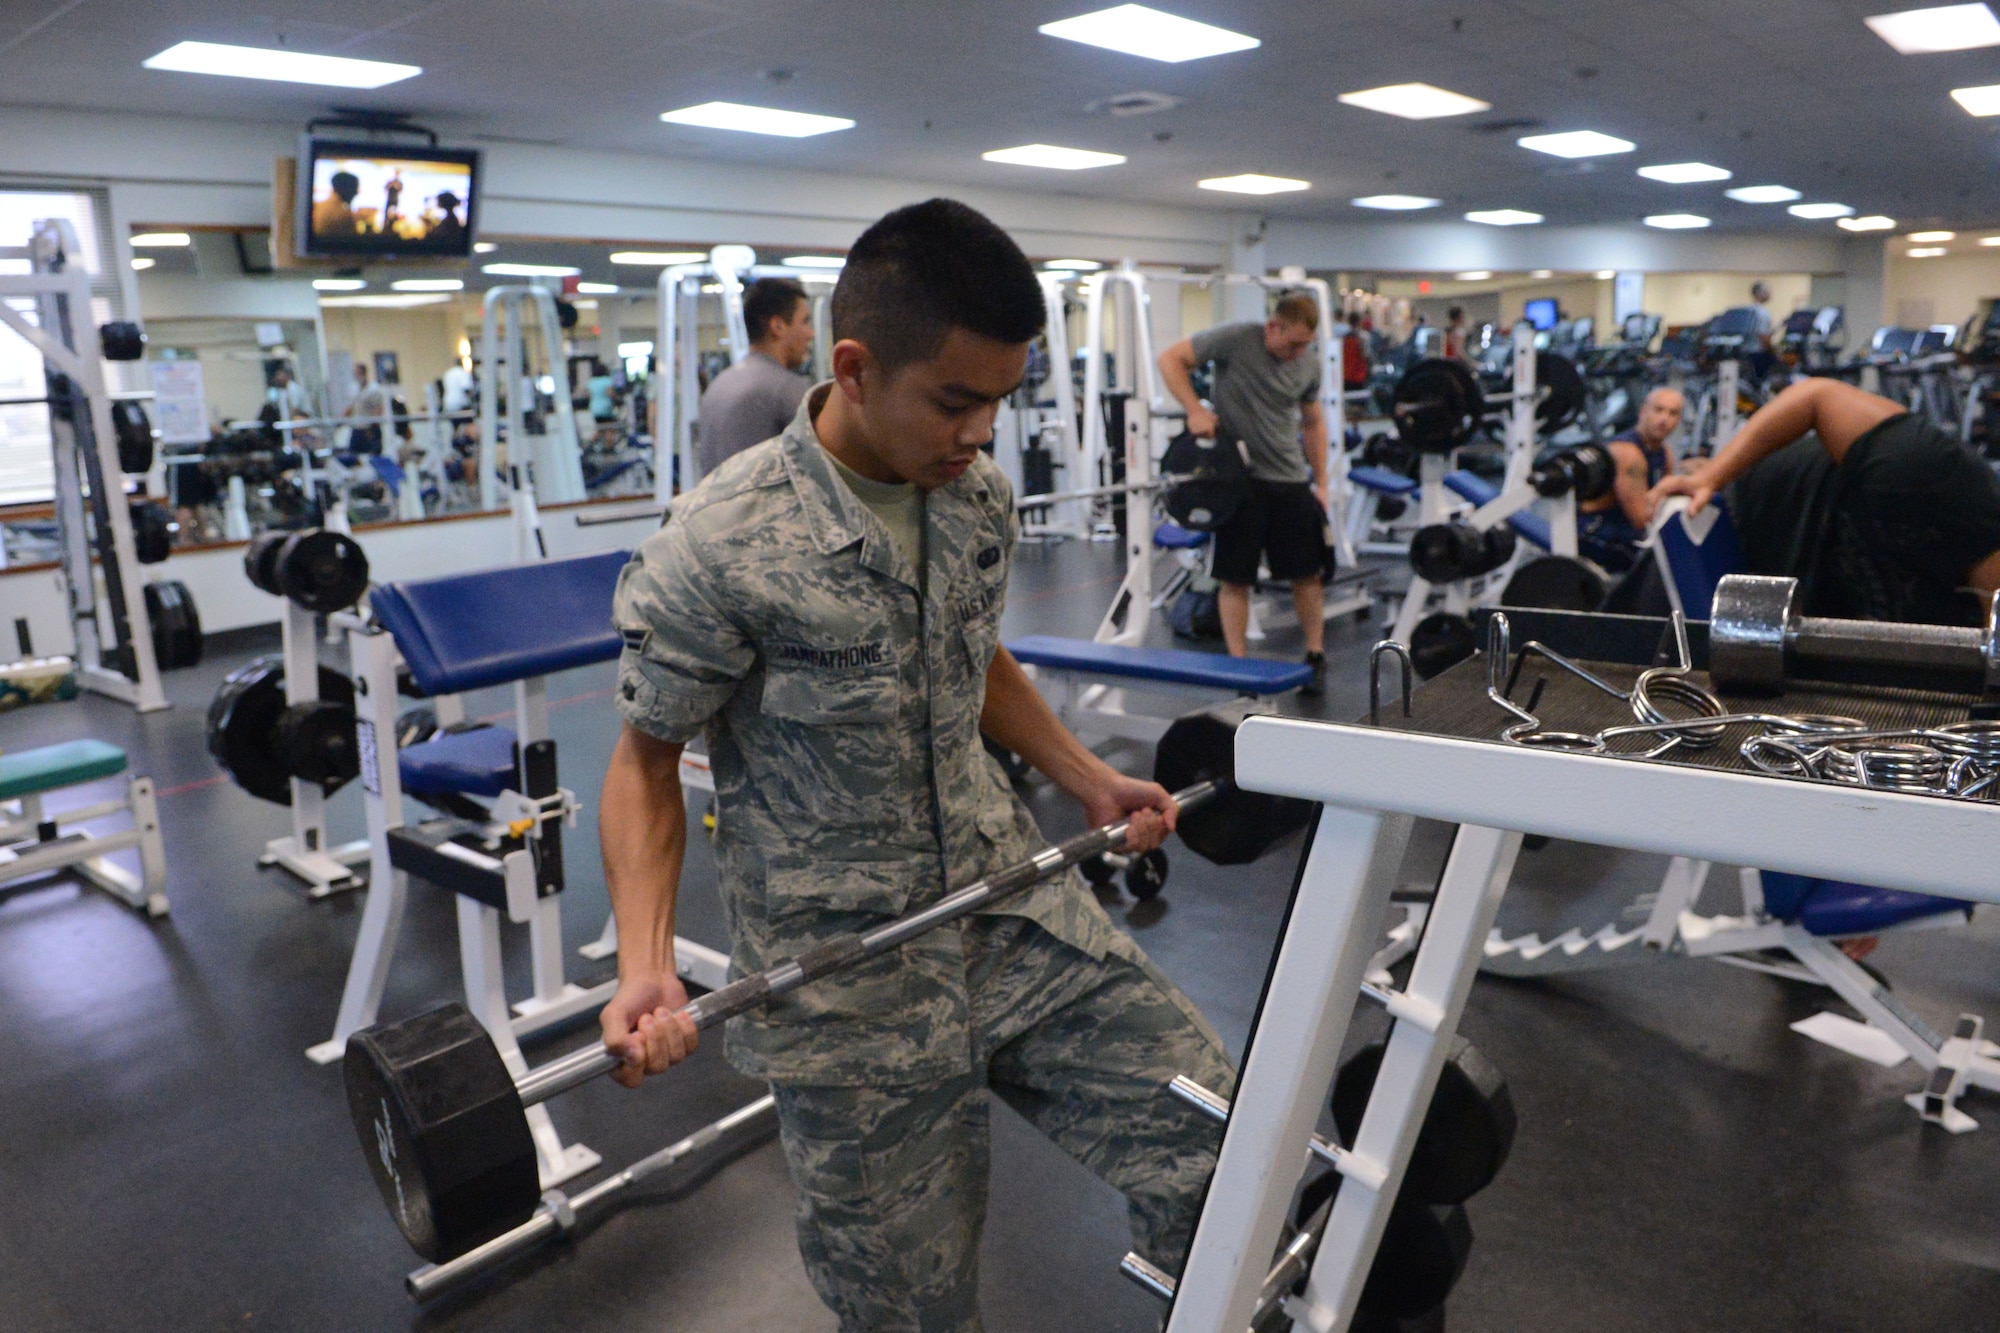 Airman 1st Class Andrew Jampathong, 36th Force Support Squadron fitness specialist, returns weights to a rack as a part of Coral Reef Fitness Center’s hourly checklist Sept. 6, 2013, on Andersen Air Force Base, Guam. Fitness specialists keep the facility running smoothly by maintaining the machines, cleaning all equipment and ensuring the equipment is in its proper place. (U.S. Air Force photo by Airman 1st Class Emily A. Bradley/Released)